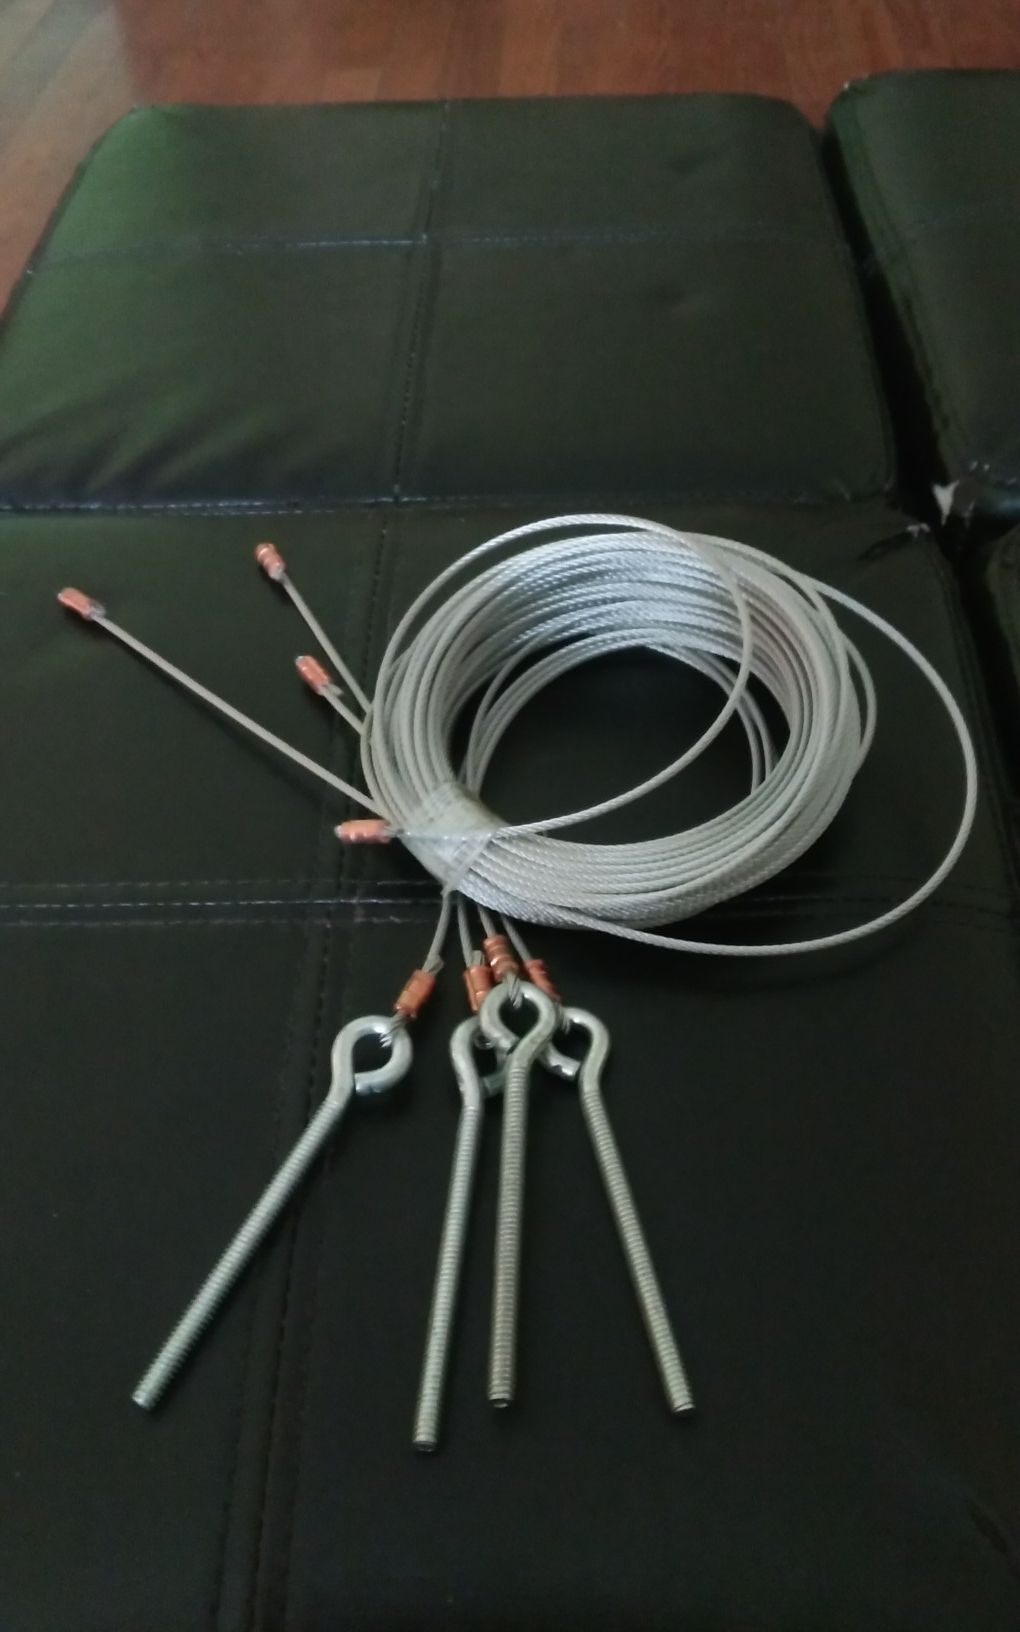 Pop up camper lifter cables for L and W system